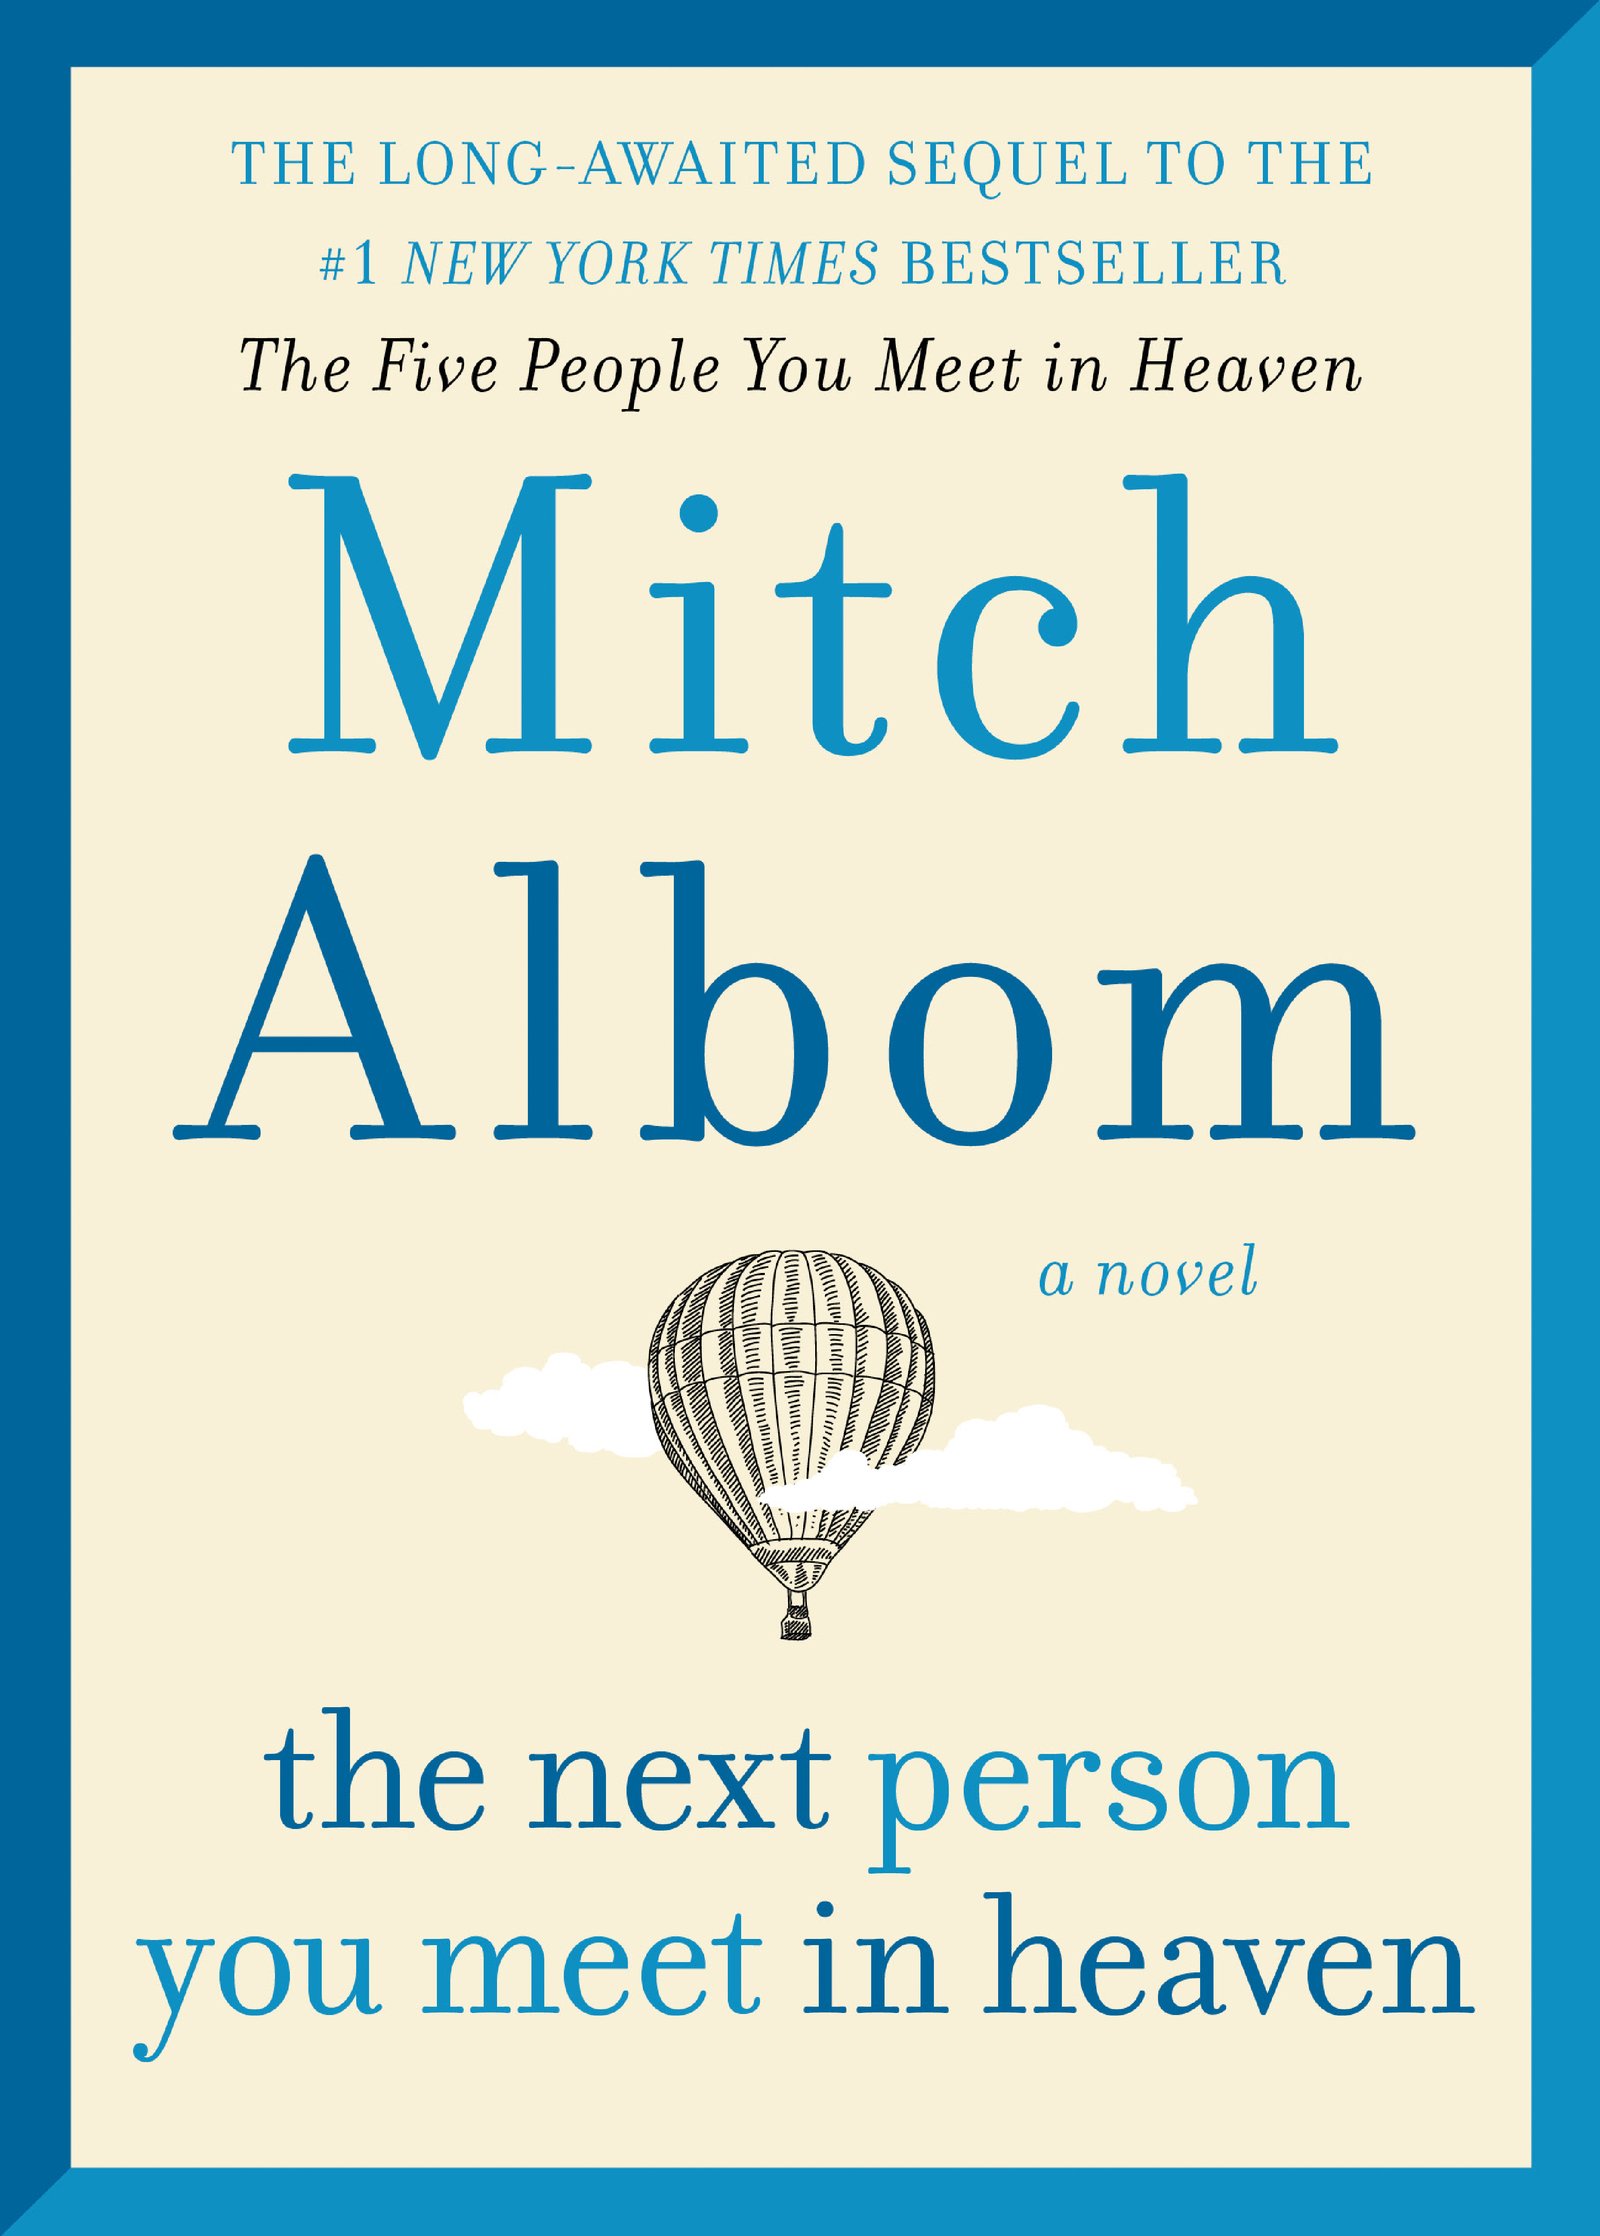 mitch-albom-to-speak-and-sign-latest-book-at-msu-college-of-arts-letters